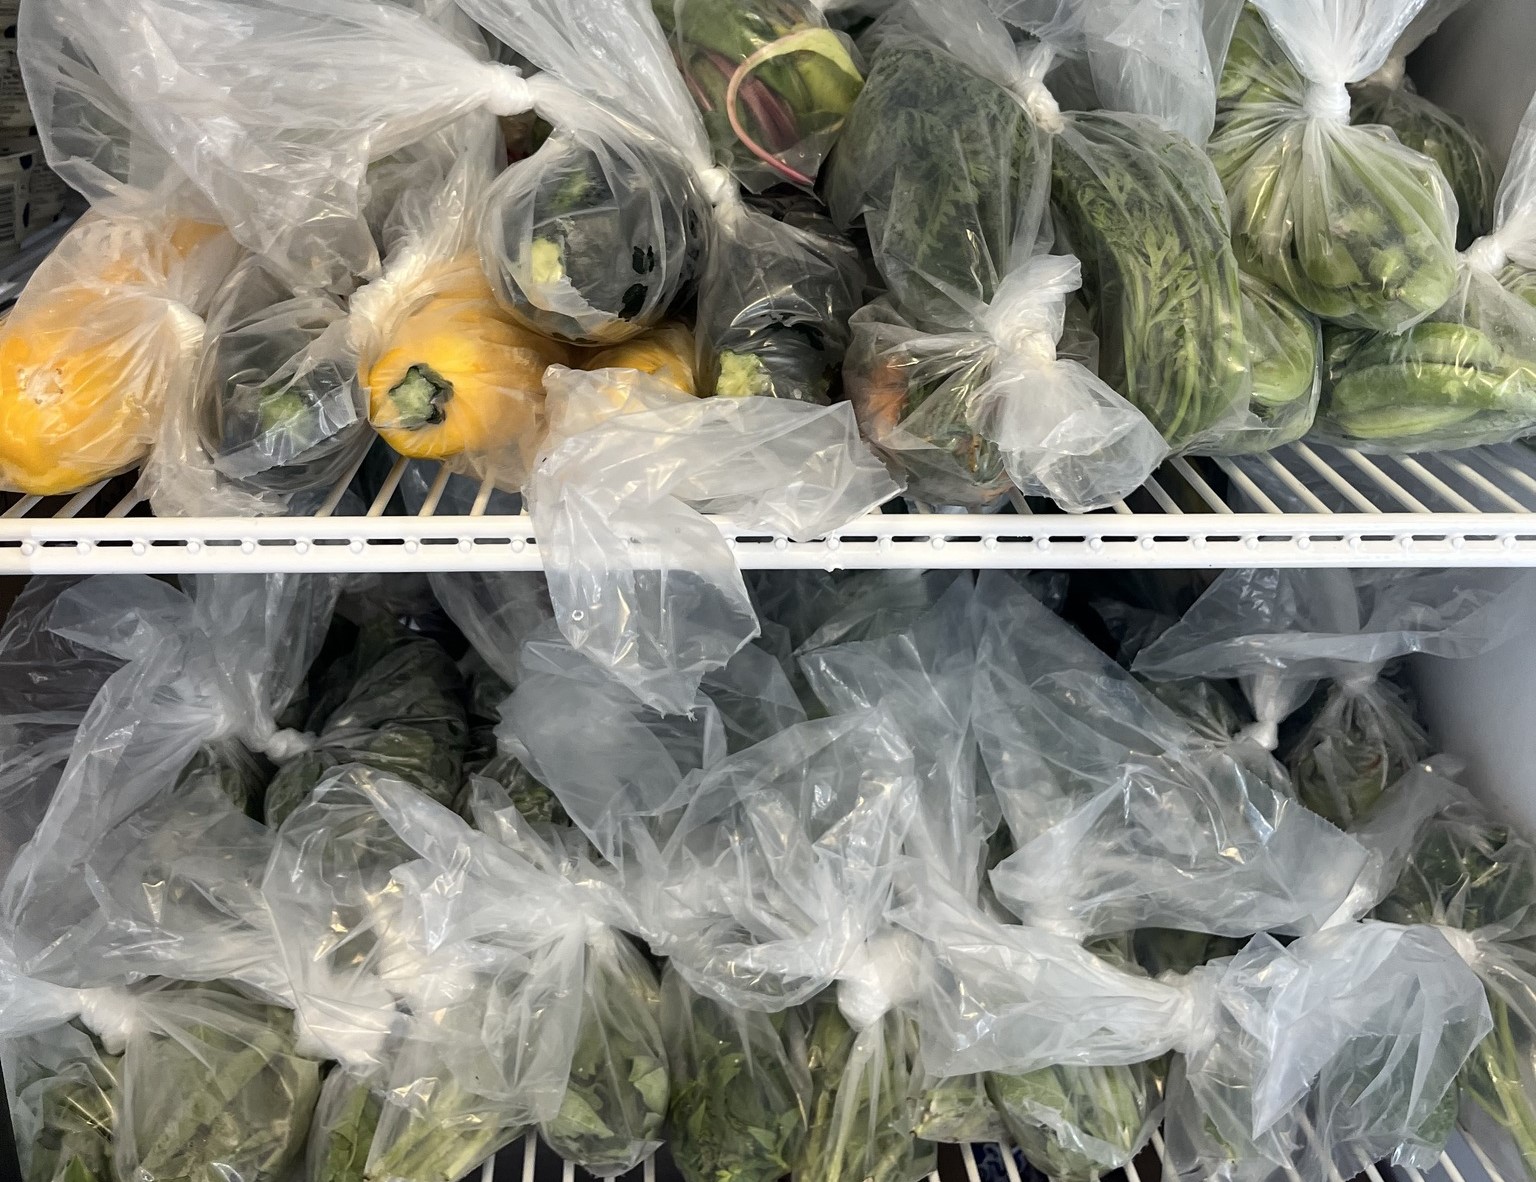 Two white wire refrigerator shelves are loaded with green and yellow vegetables, individually bagged in plastic.